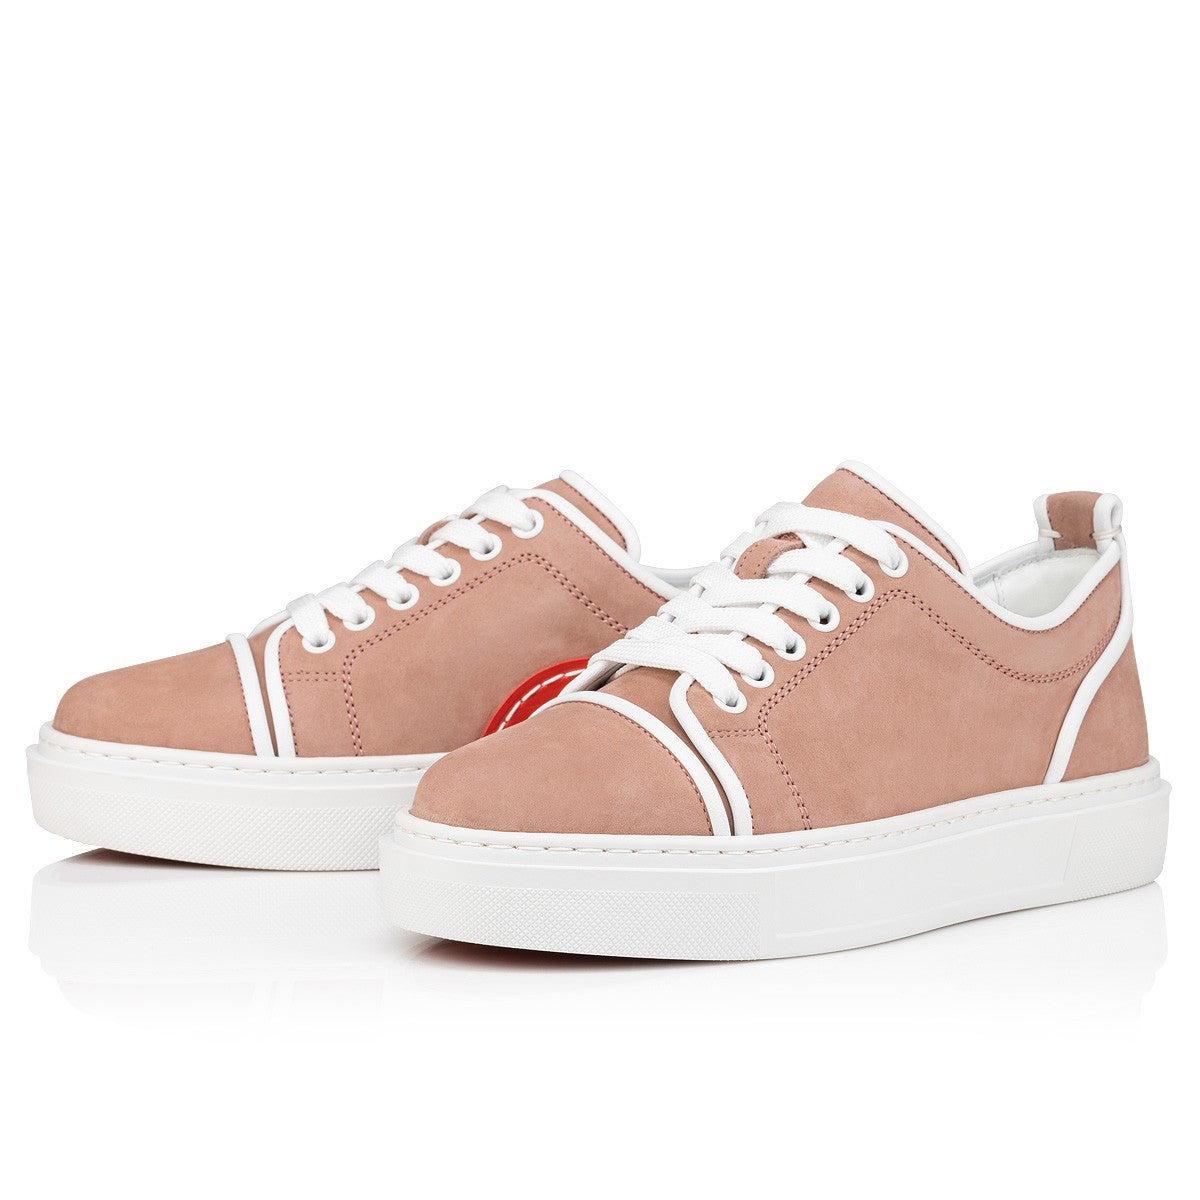 Adolon Woman Calf Leather and Nappa Leather Tornado Sneakers